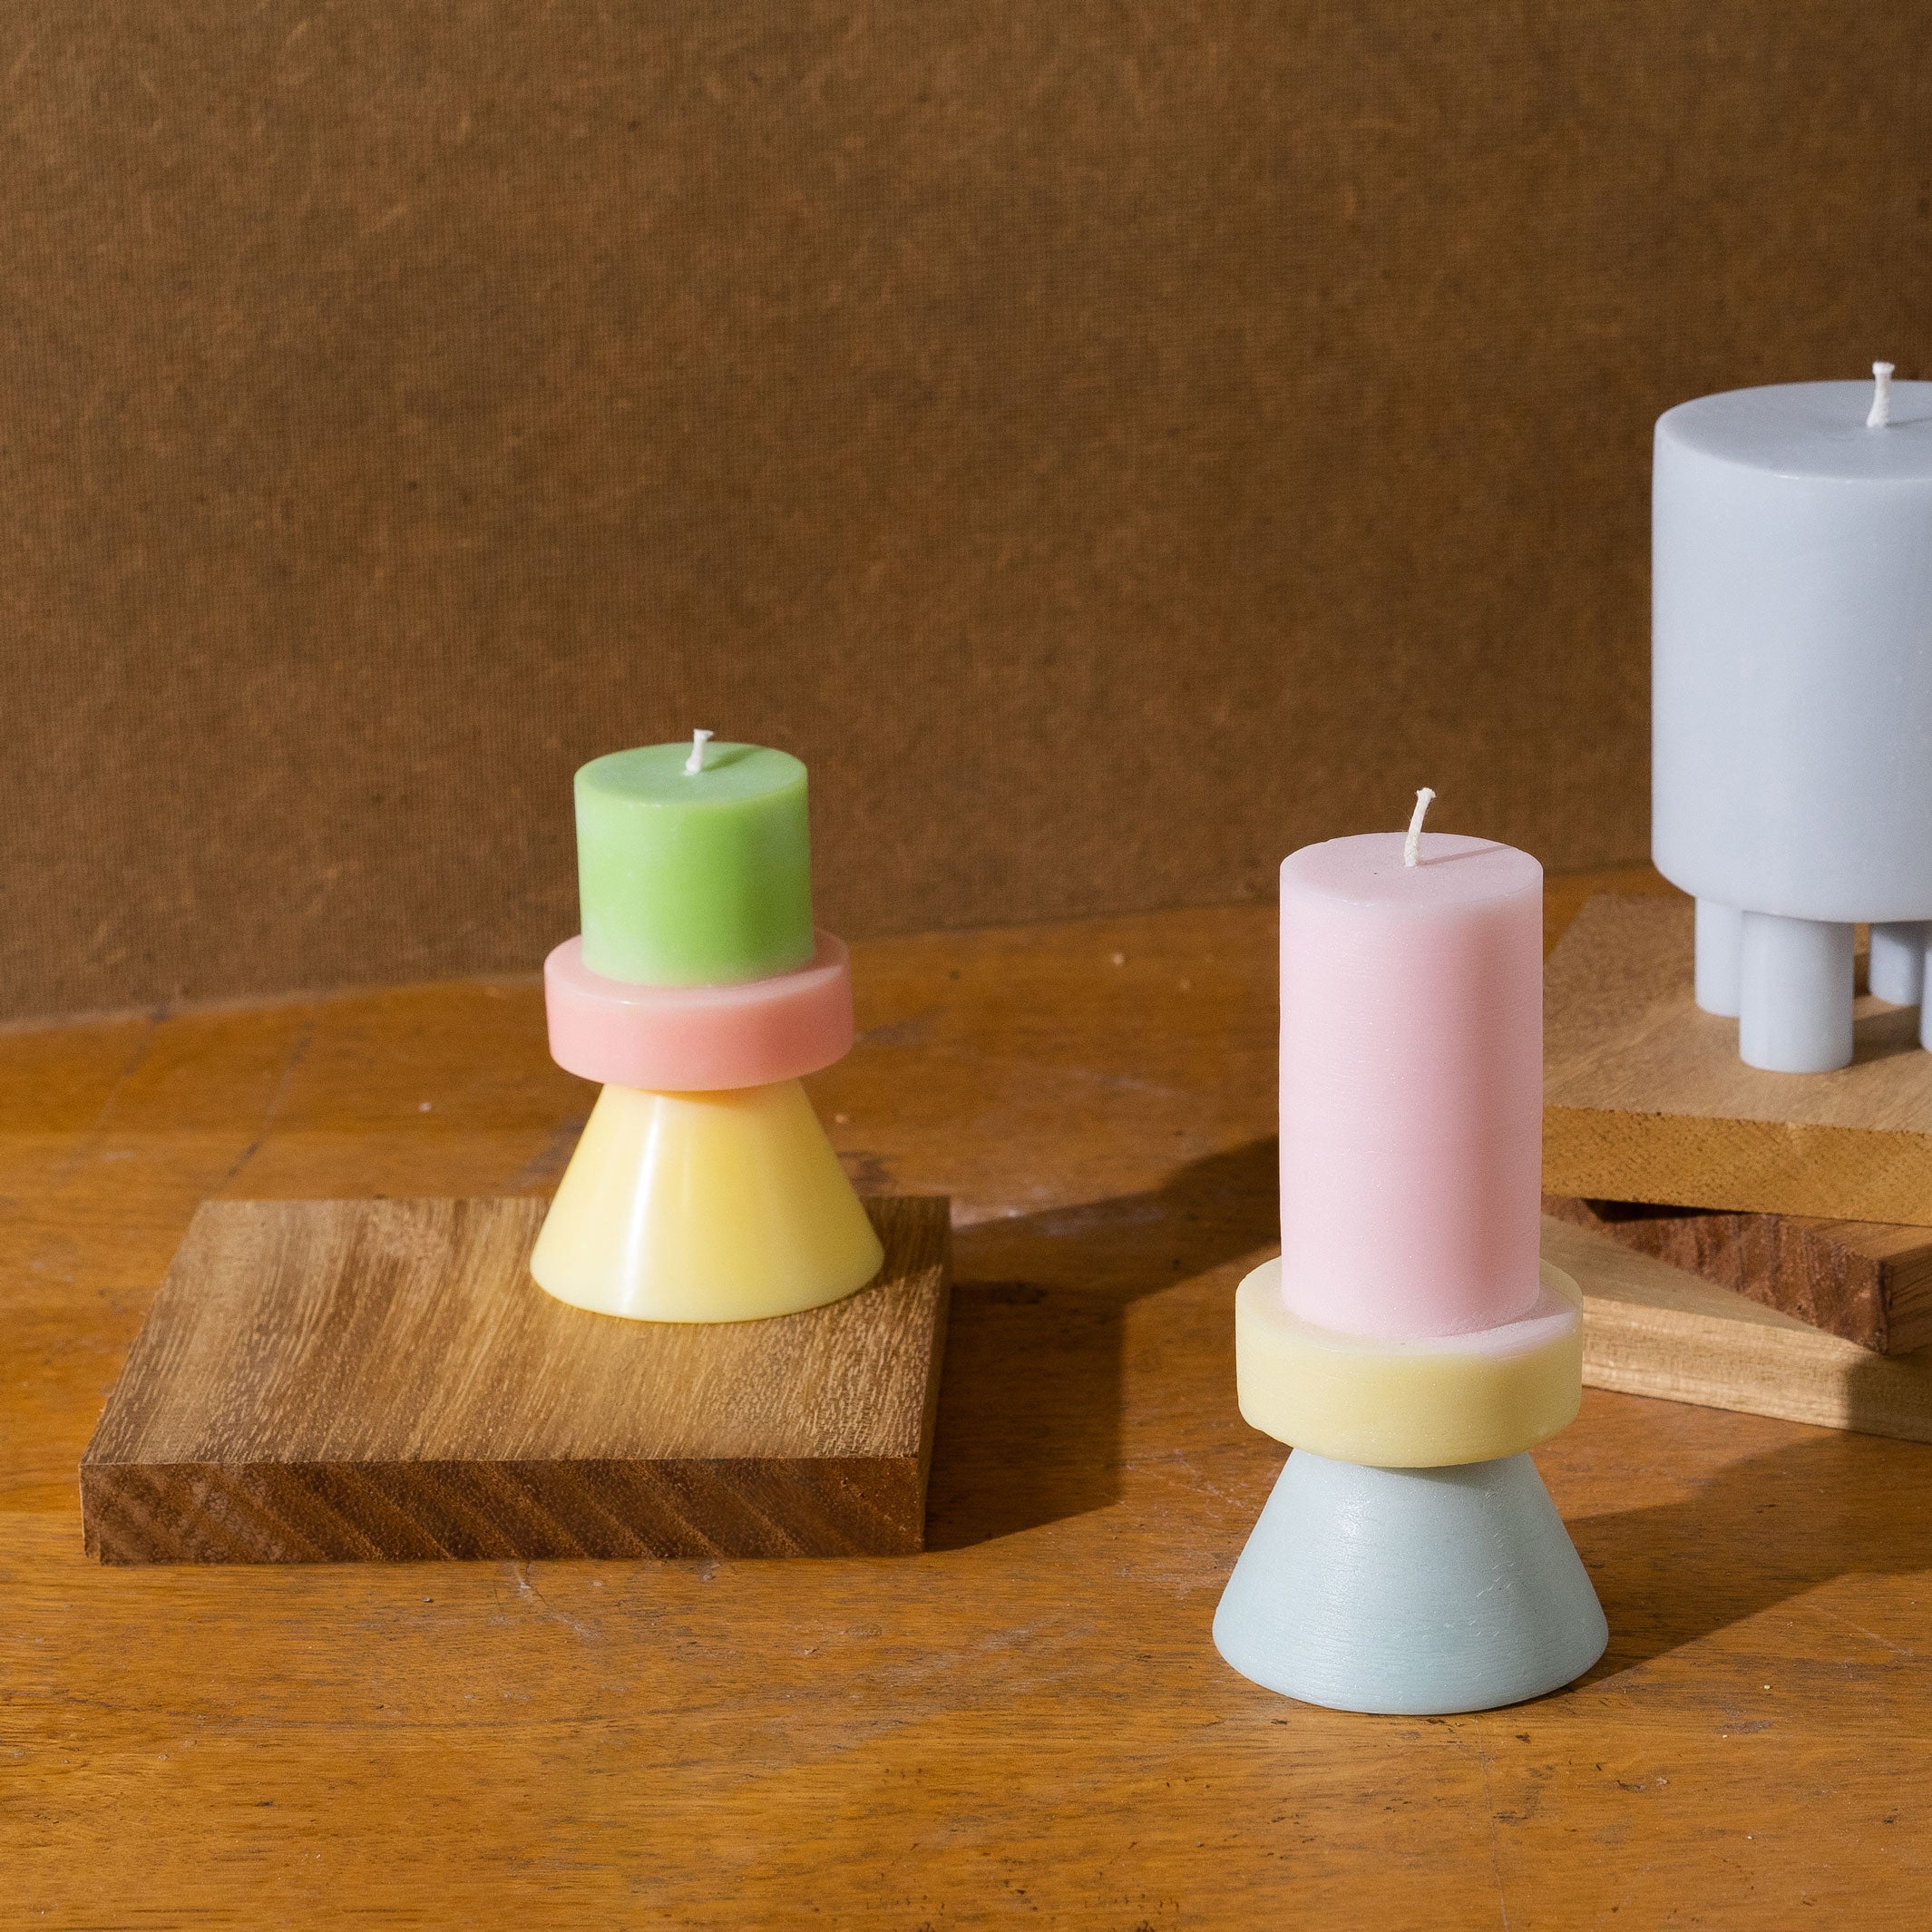 STACK CANDLE TALL | Colors flosspink-paleyellow-mint | 30 hrs. burning time | YOD AND CO